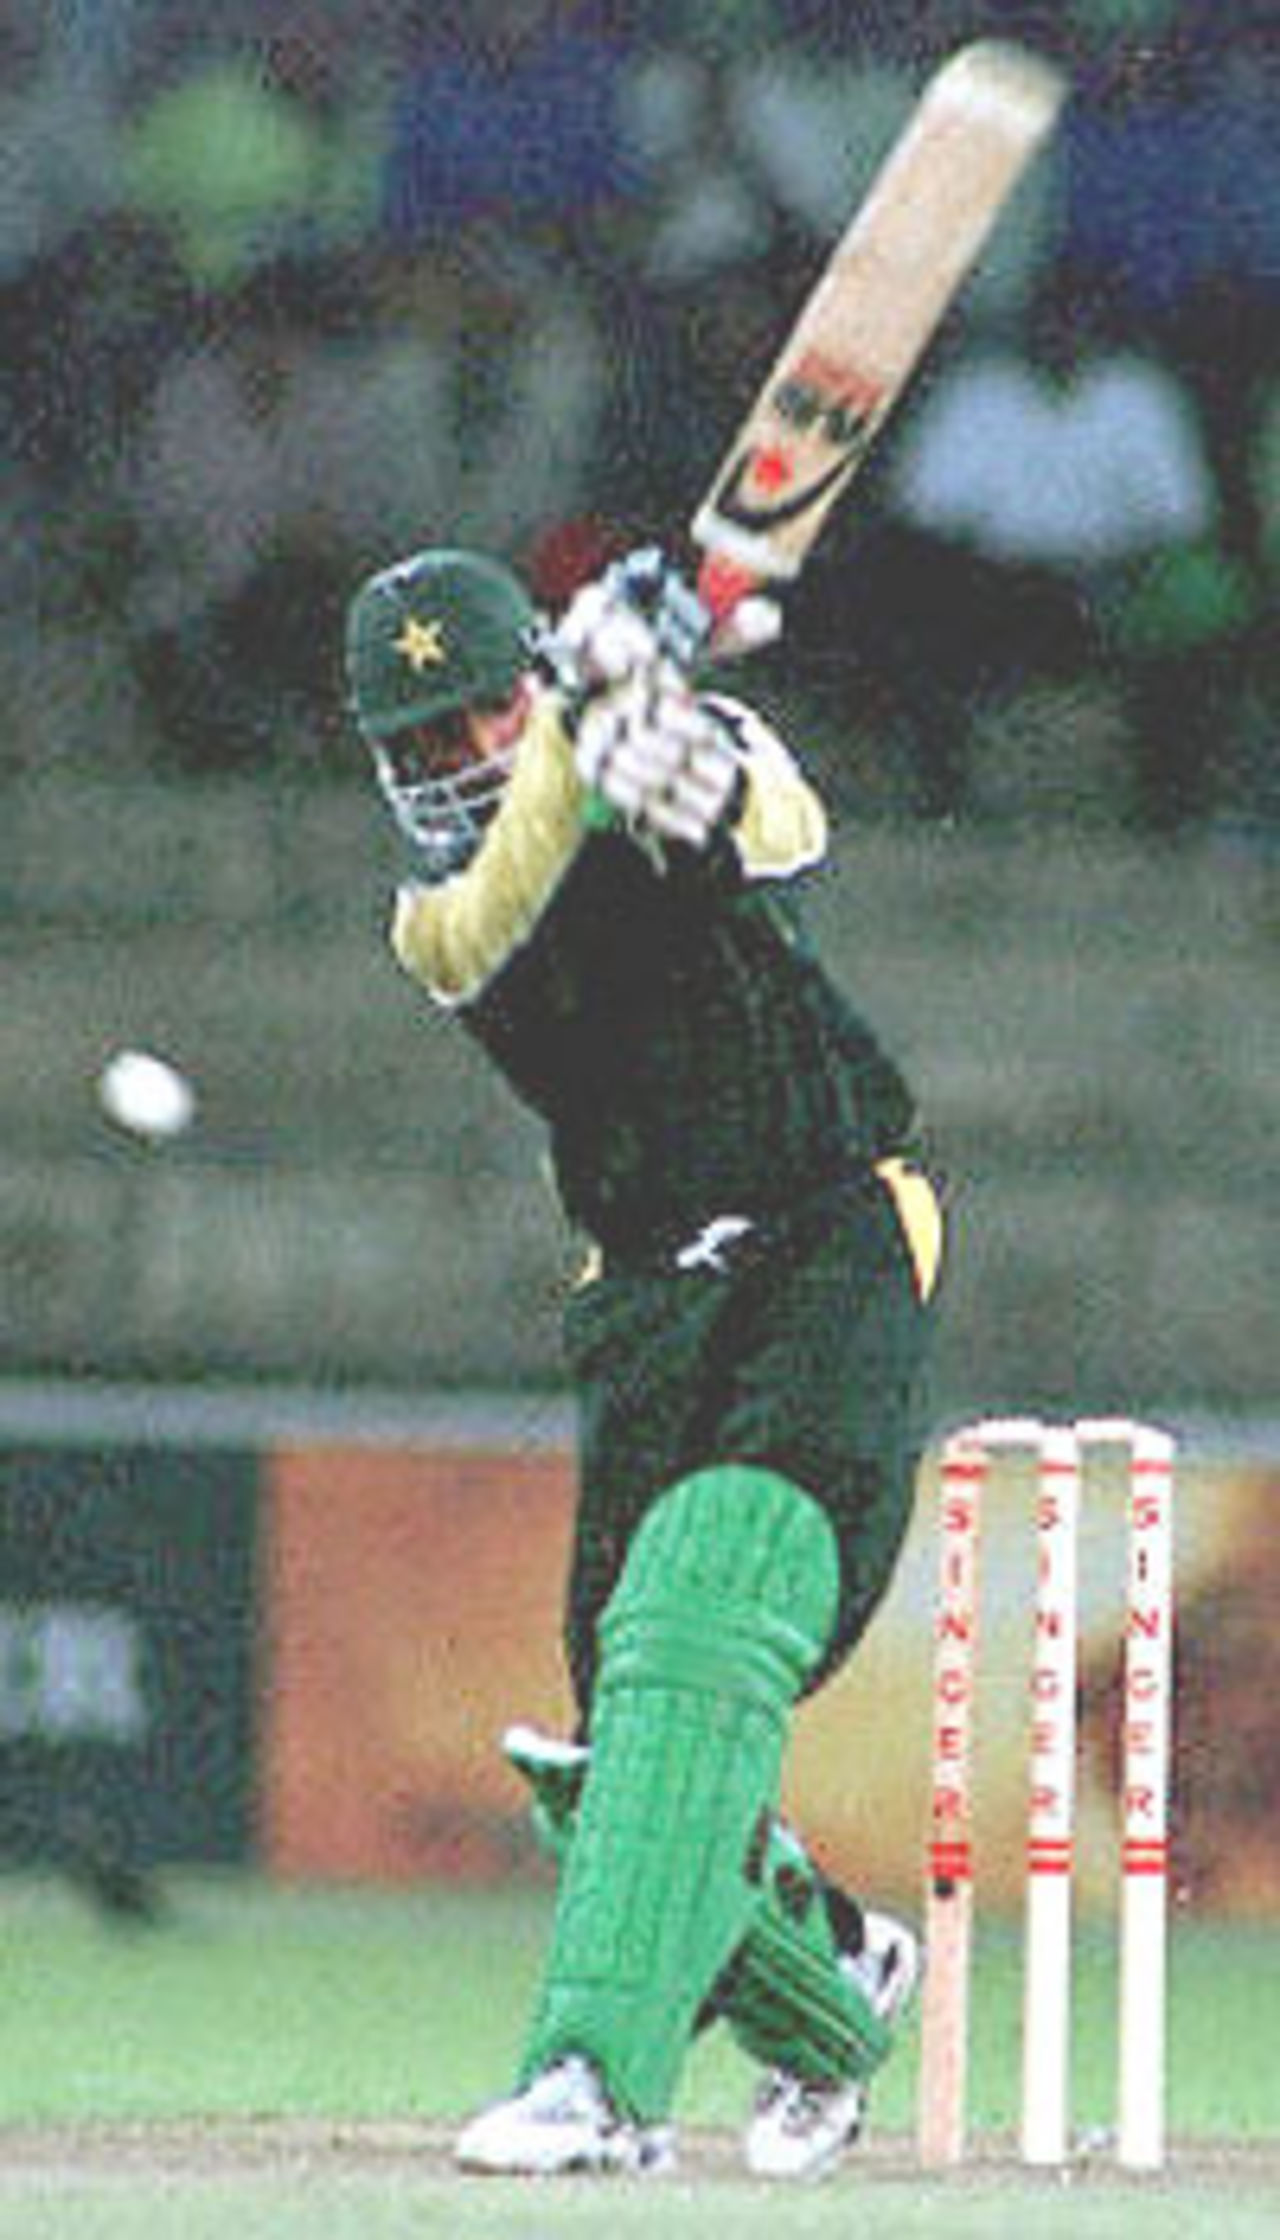 Pakistan batsman Imran Nazir in action in the match against South Africa in the Singer Triangular series in the Sri Lankan capital of Colombo. Pakistan were set a target of 242 to win. Singer Triangular Series, 2000, 3rd Match, Pakistan v South Africa, R.Premadasa Stadium, Khettarama, Colombo, 8 July 2000.